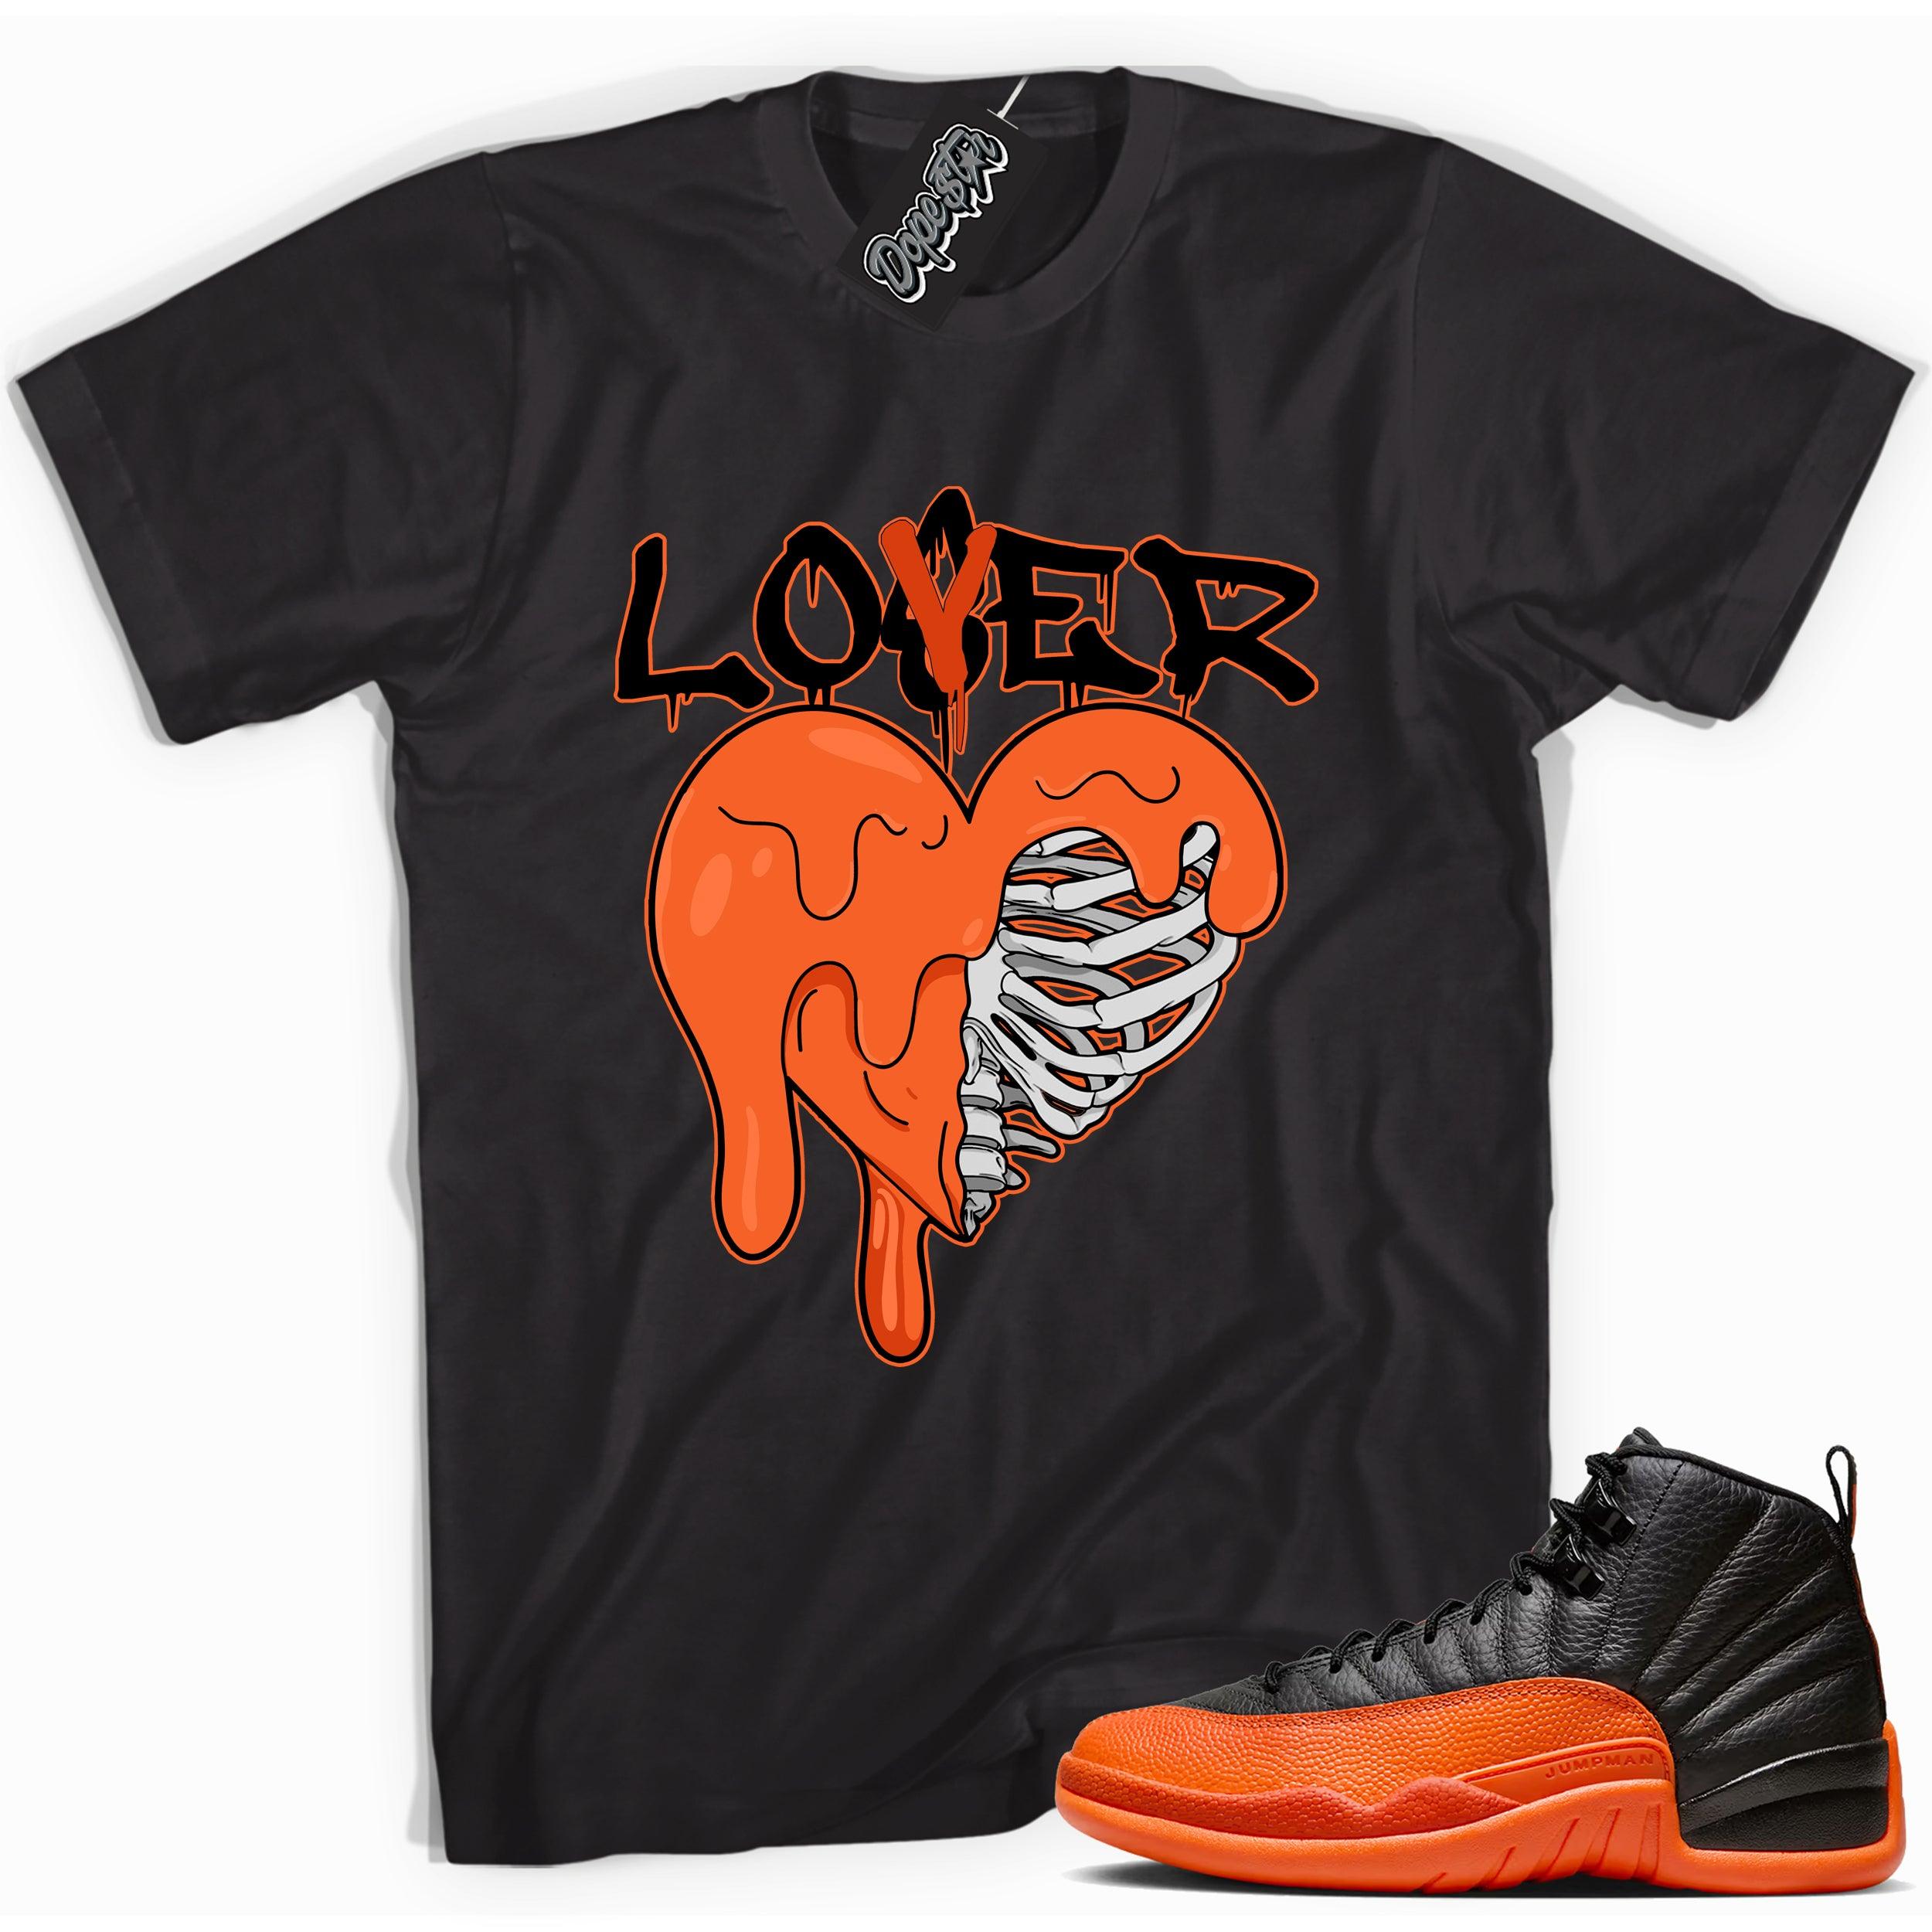 Cool Black graphic tee with “ Lover Loser ” print, that perfectly matches Air Jordan 12 Retro WNBA All-Star Brilliant Orange sneakers 